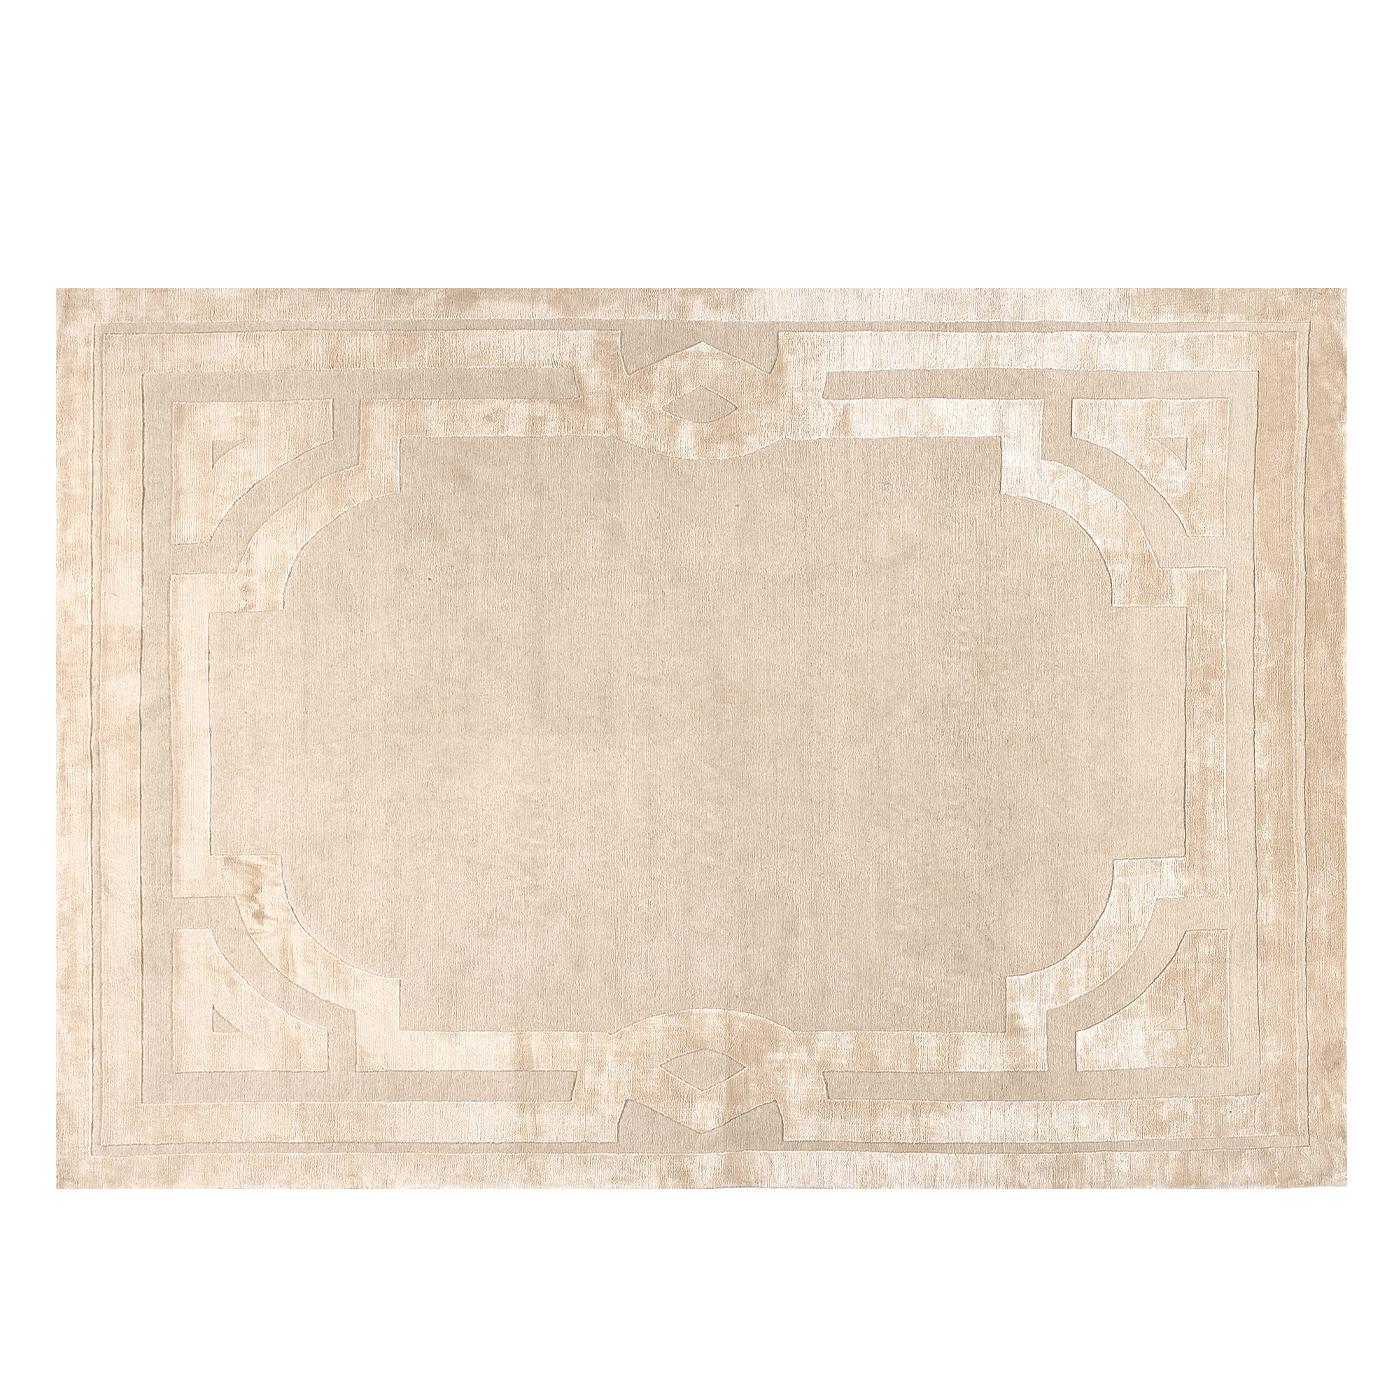 Inspired by the elegance ideally associated with aristocracy - hence the piece's name - this refined rug exemplifies the mastery of Nepalese expert weavers. They blend 80% of Himalayan wool and 20% of shimmering silk to craft the harmonious lines of